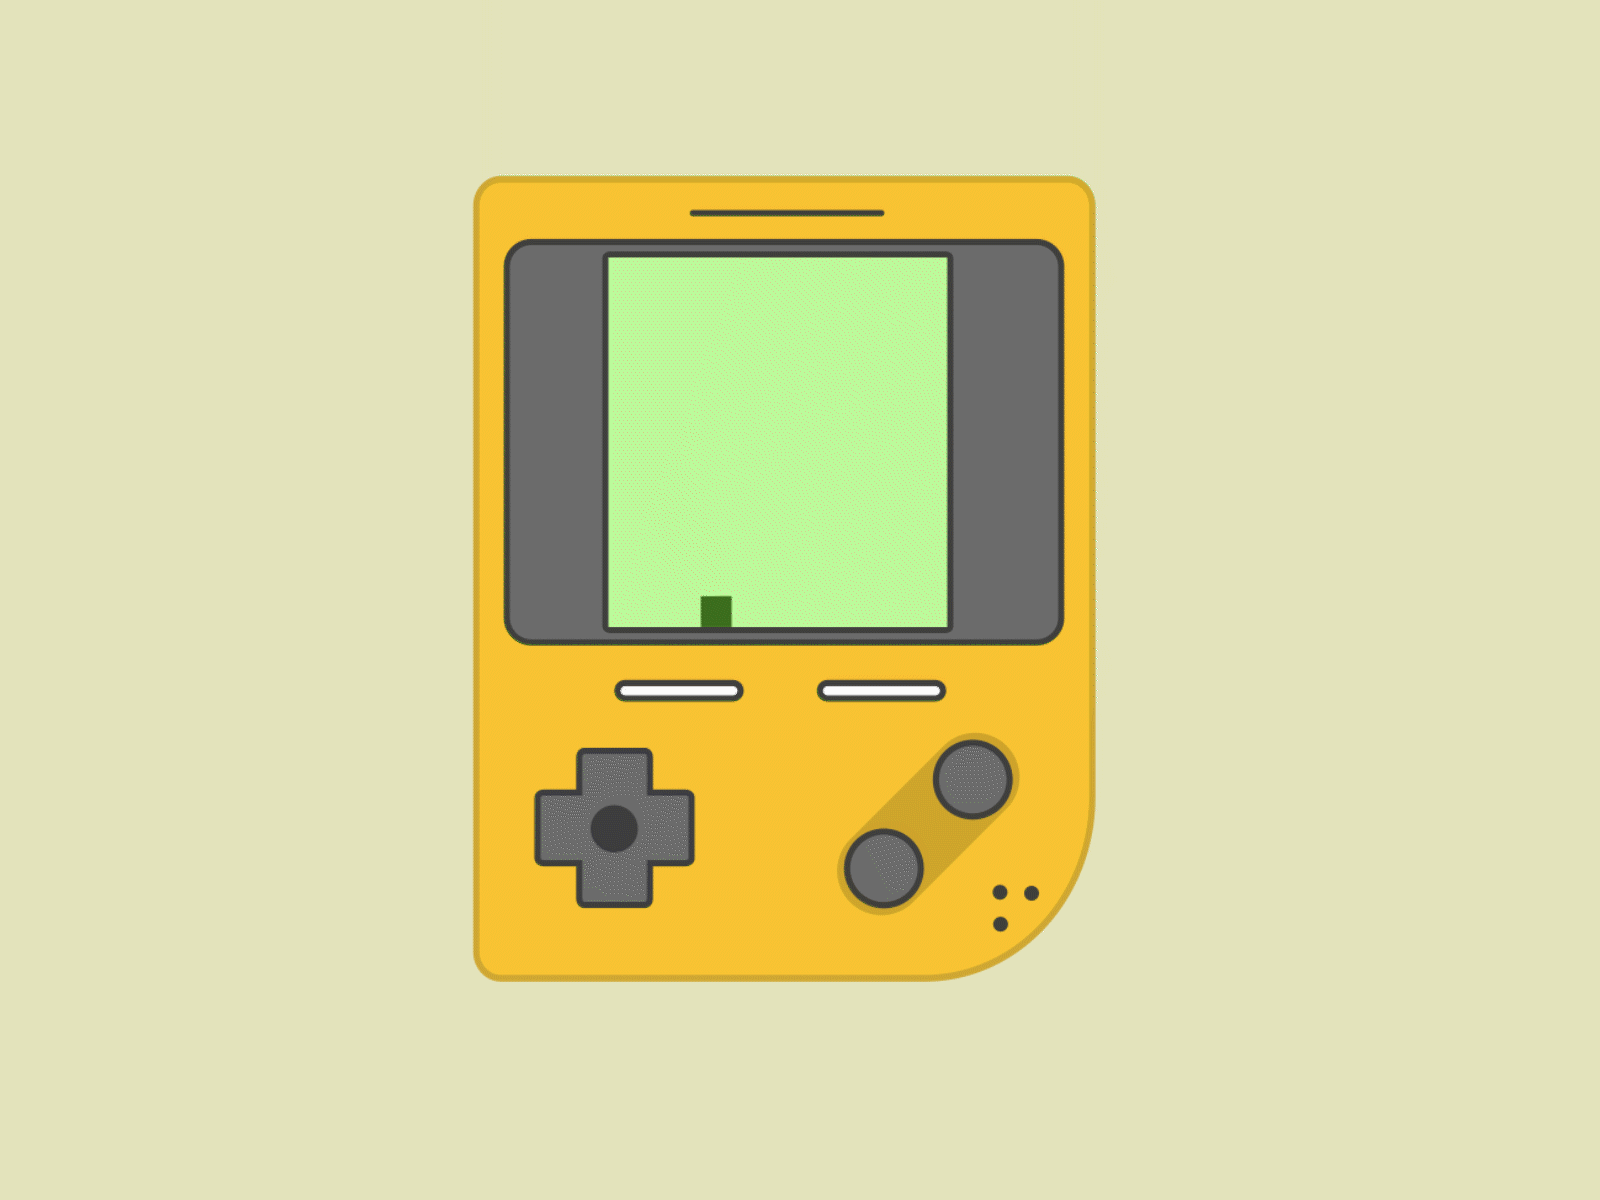 Remember this game? after effects design gameboy motion snake